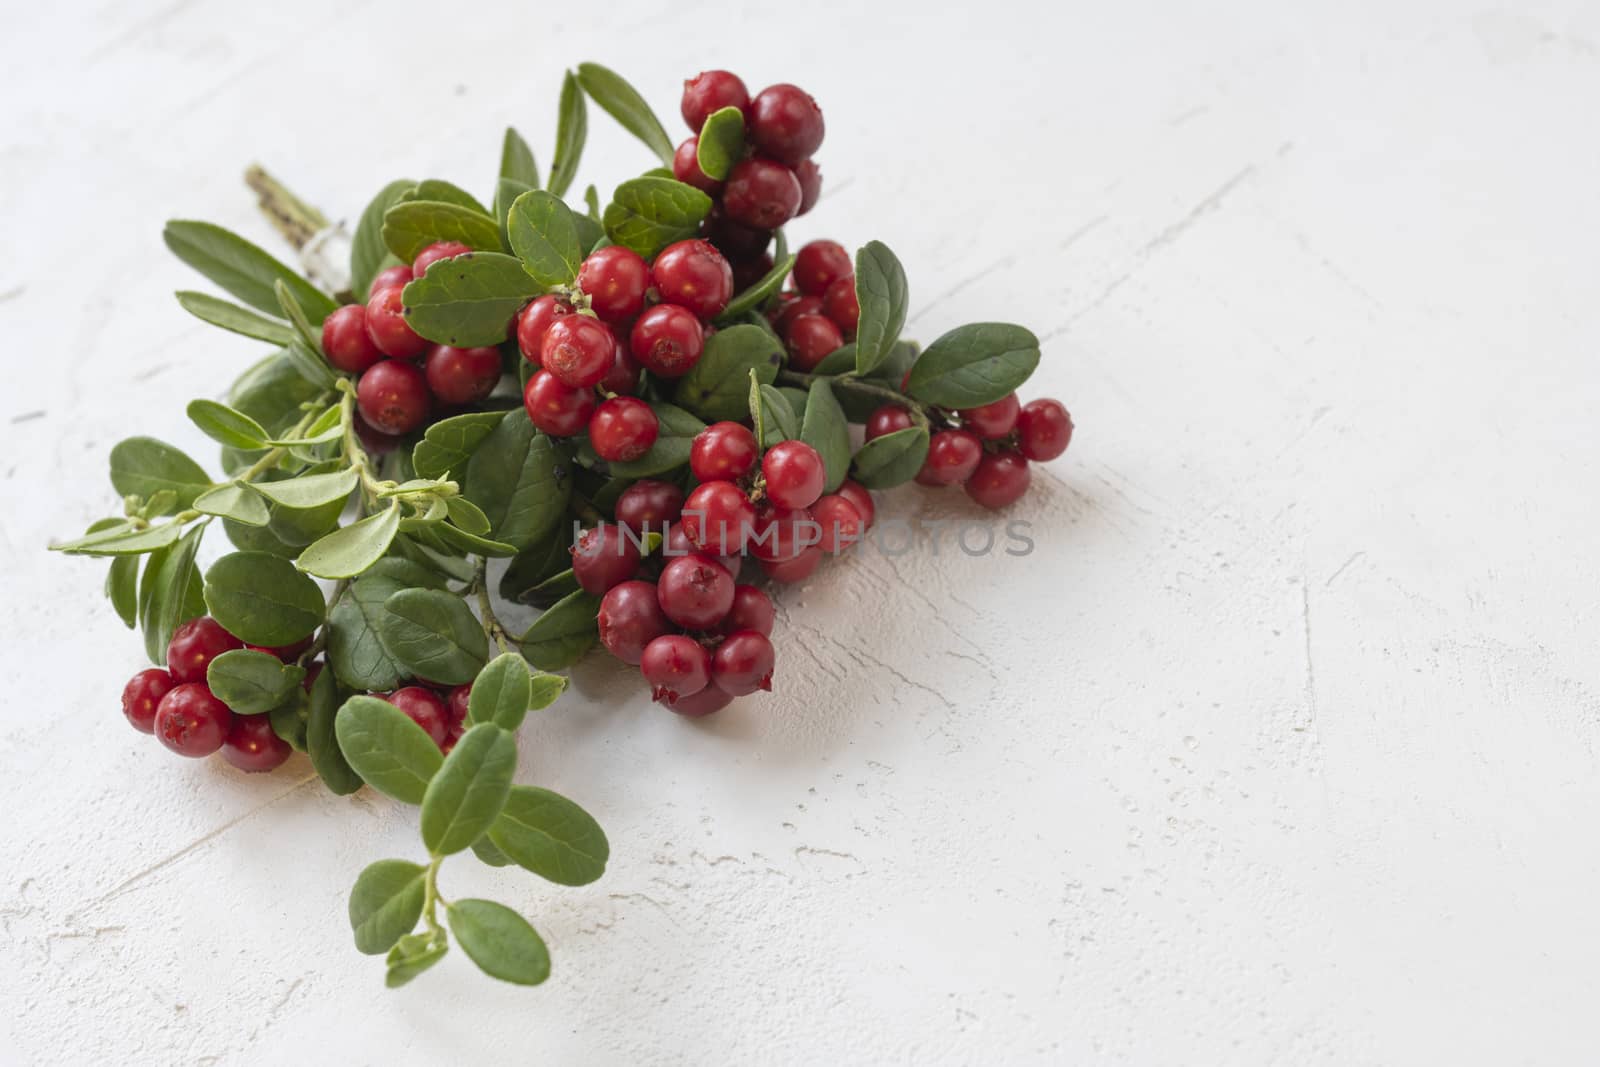 Cranberries and lingonberry. Set of wild northern berries. Clipping paths, shadows separated by sashokddt